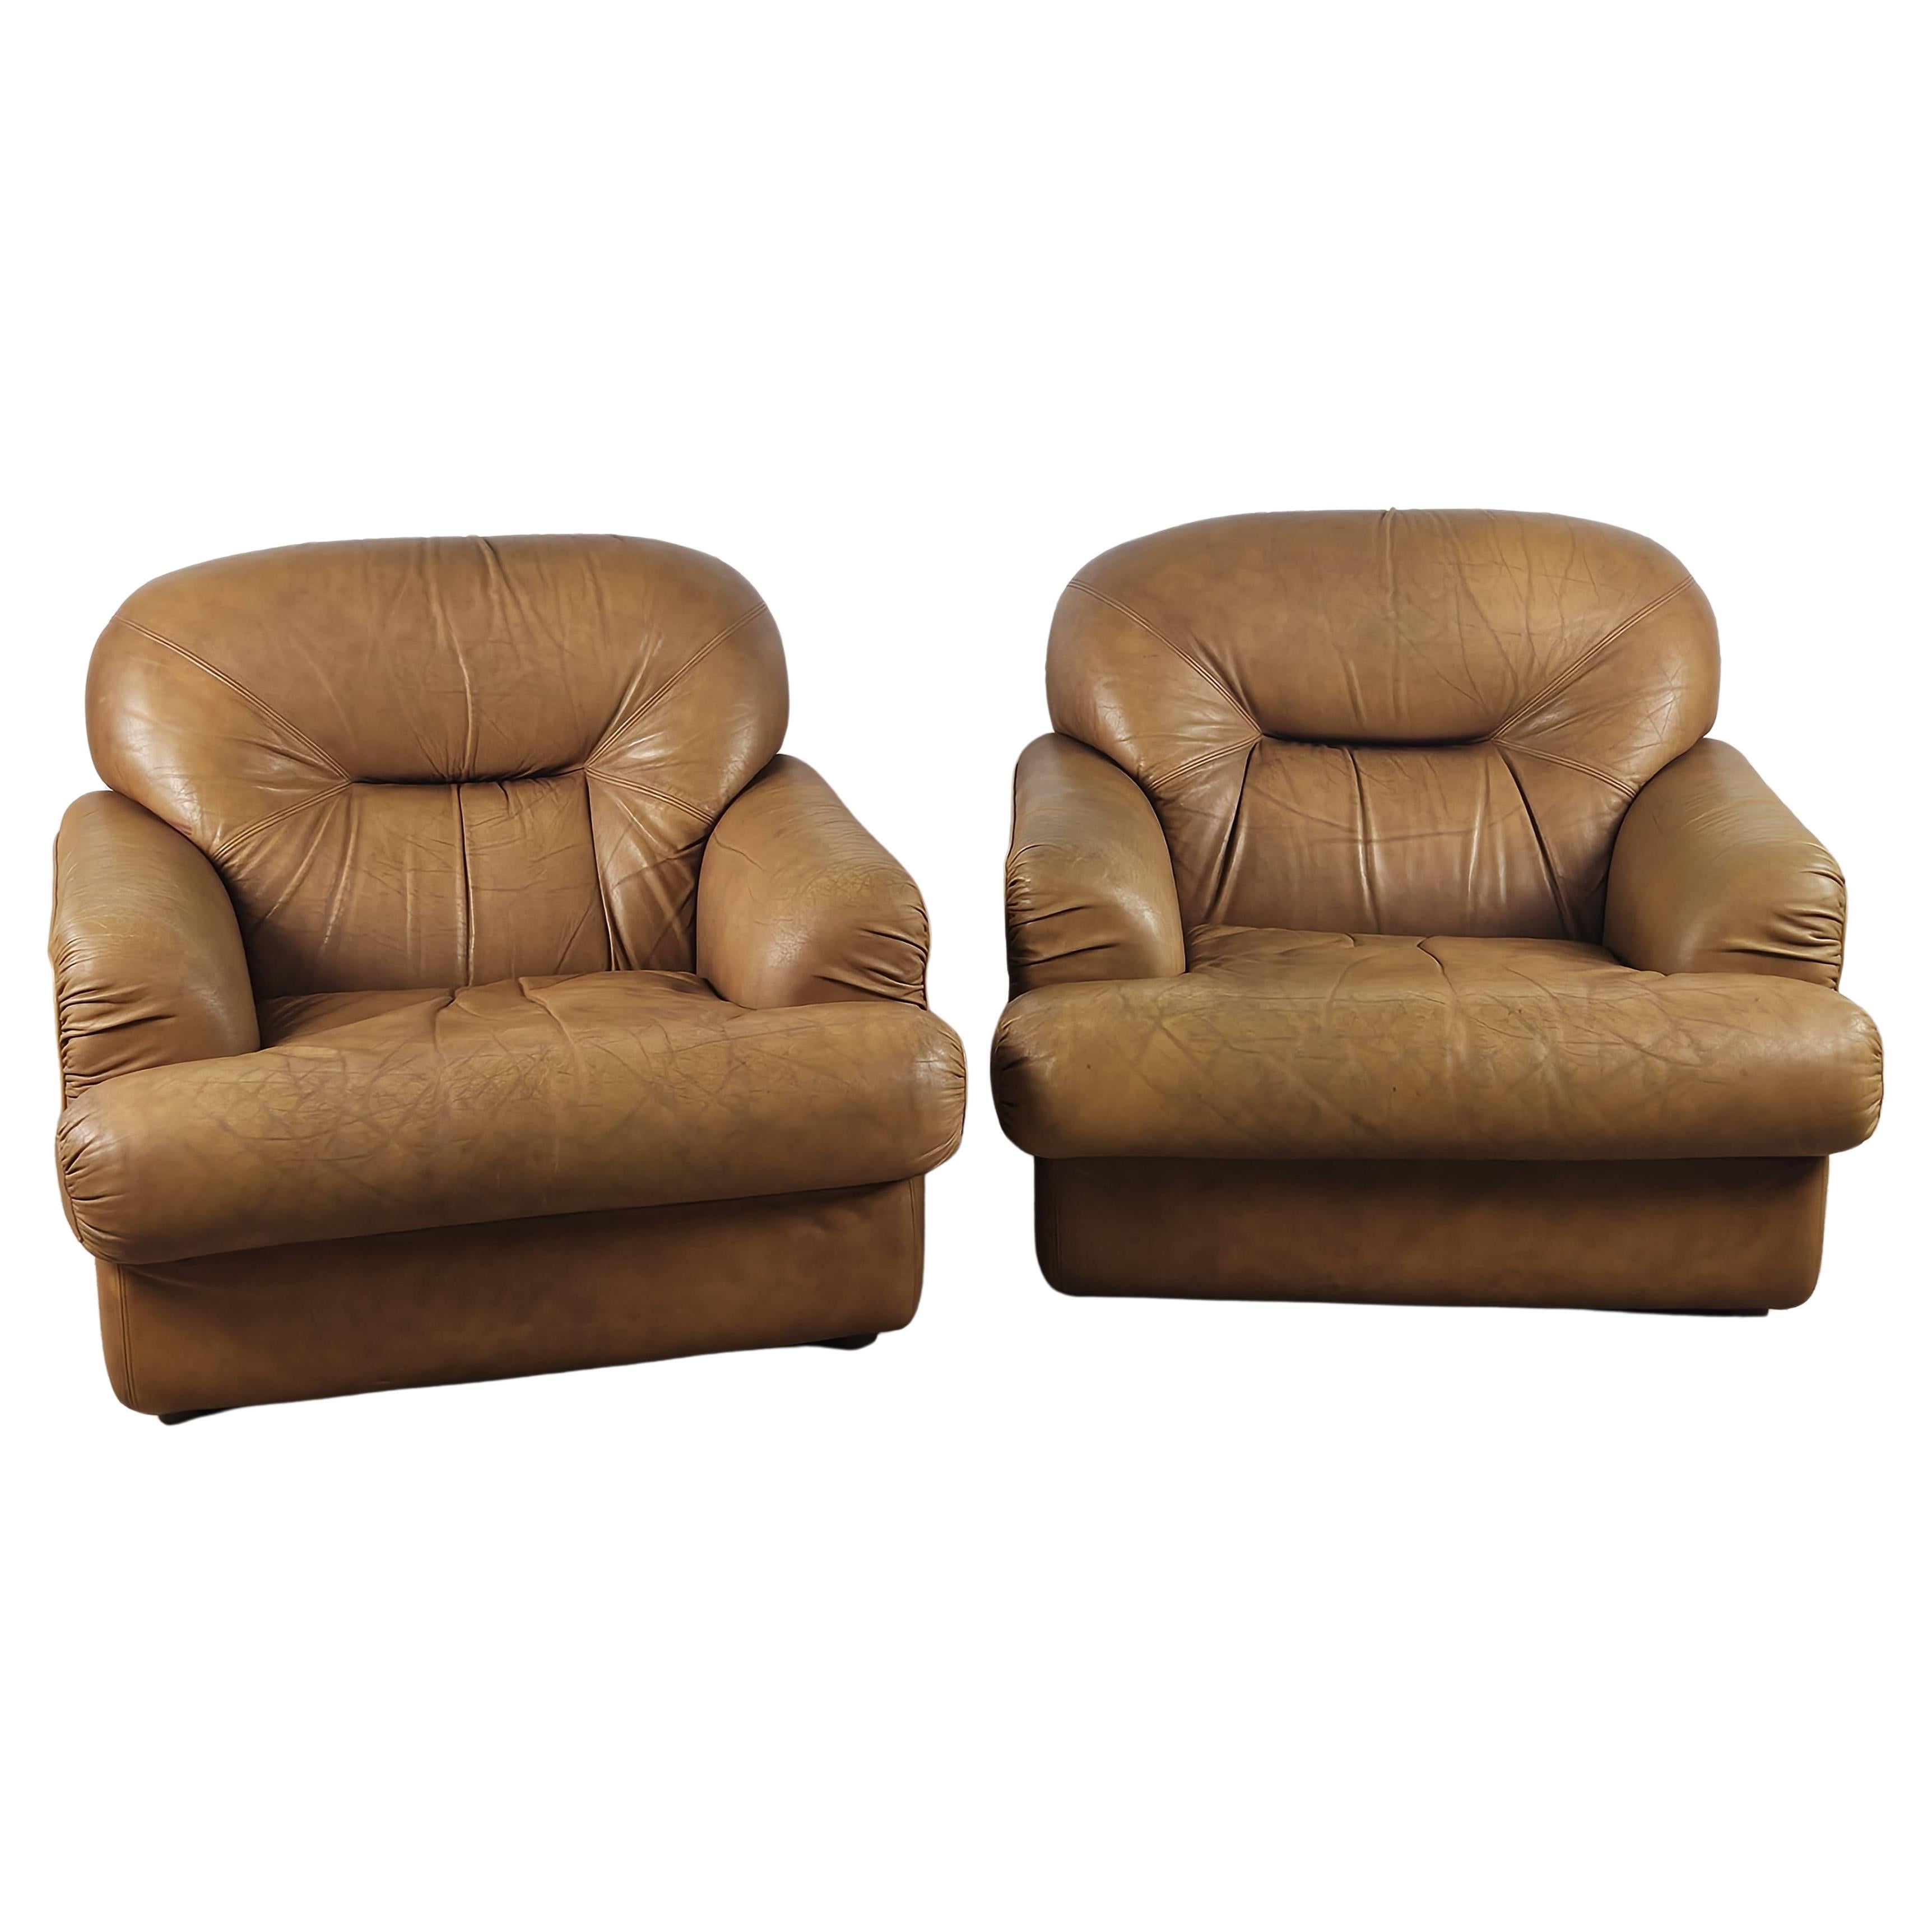 Cognac leather 1970s armchairs by Estasis Salotti - Meda For Sale